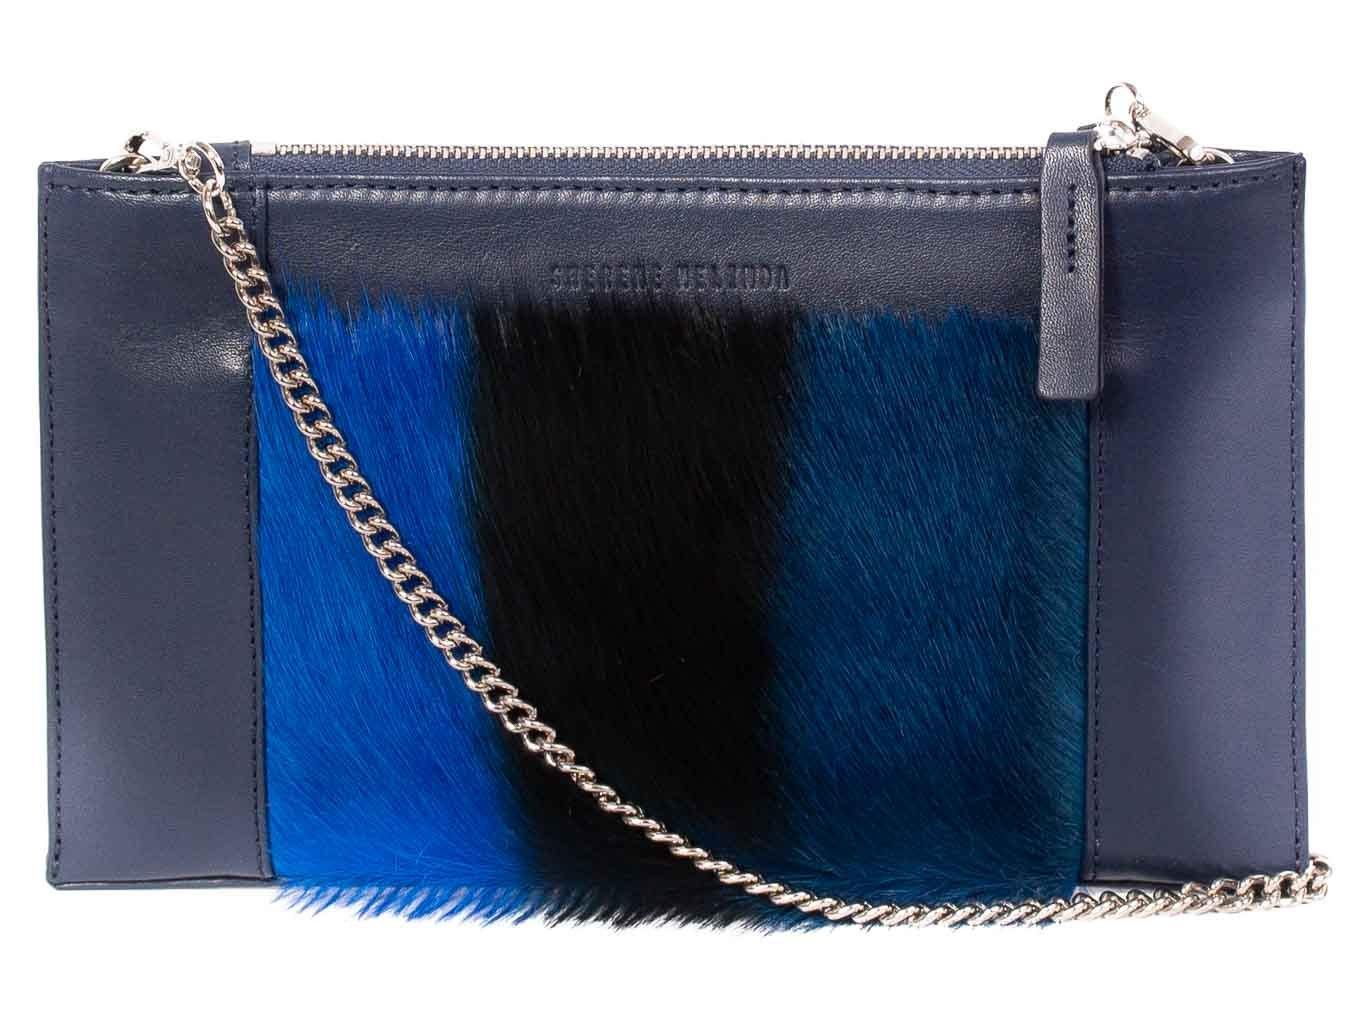 Clutch Springbok Handbag in Navy Blue with a stripe feature by Sherene Melinda front strap